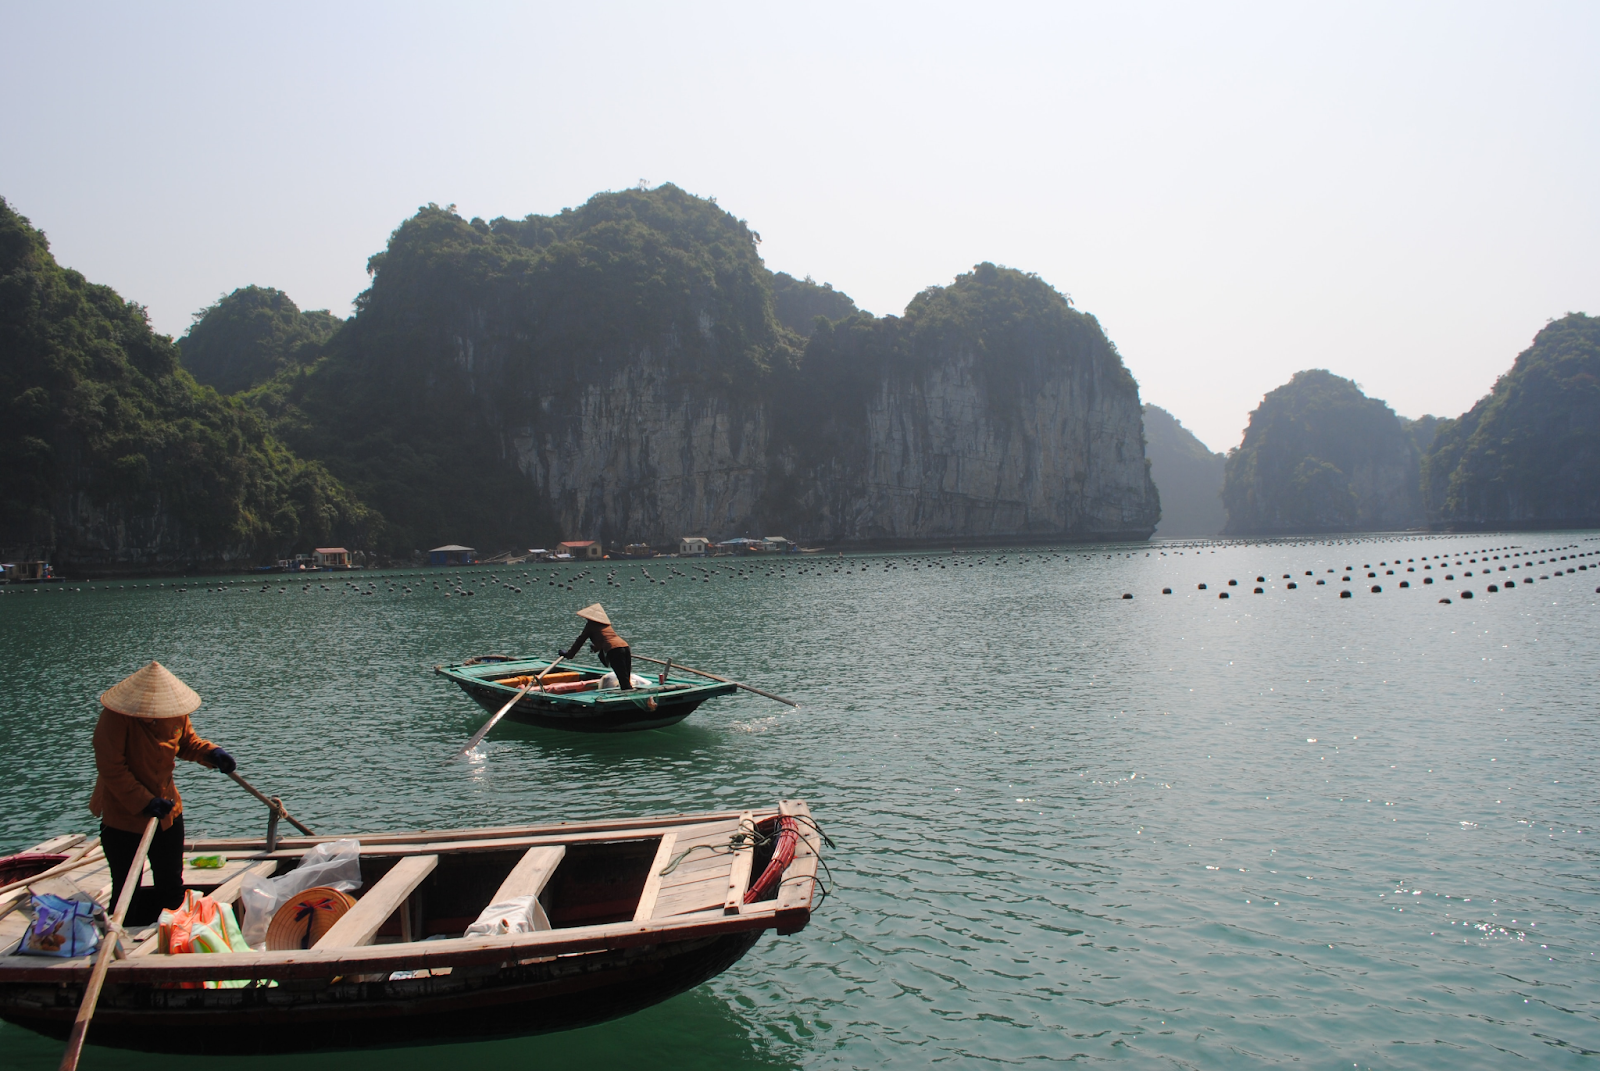 Tours and Vacations in Vietnam: Adventure Tours